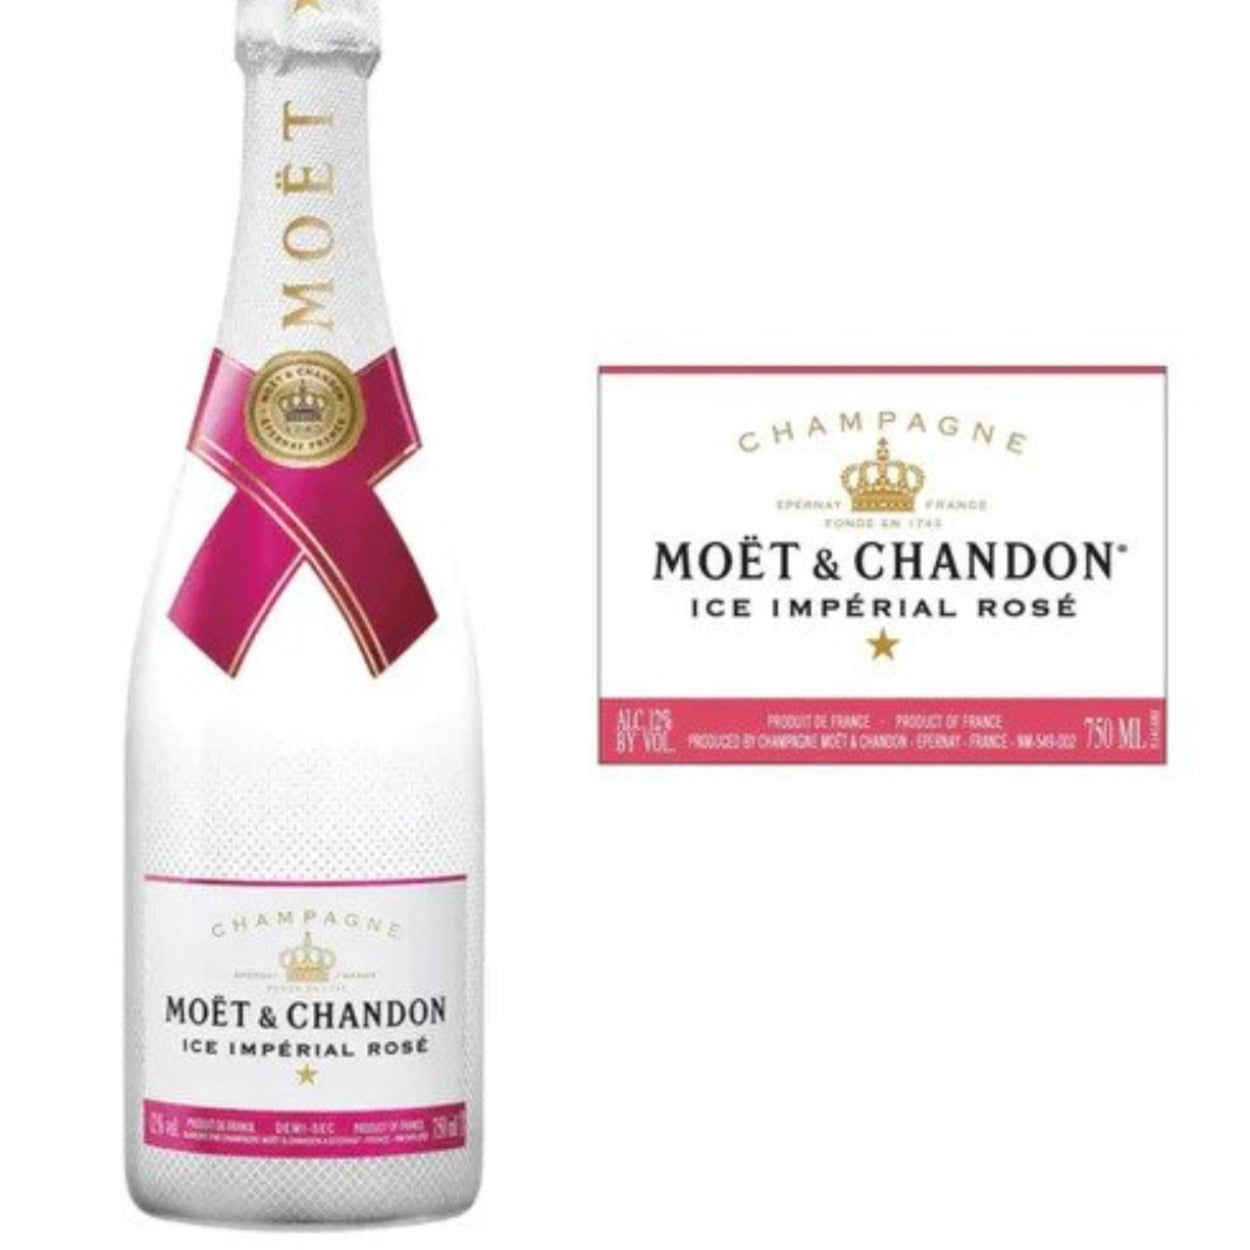 Champagne Tasting in Champagne France with Moet and Chandon •